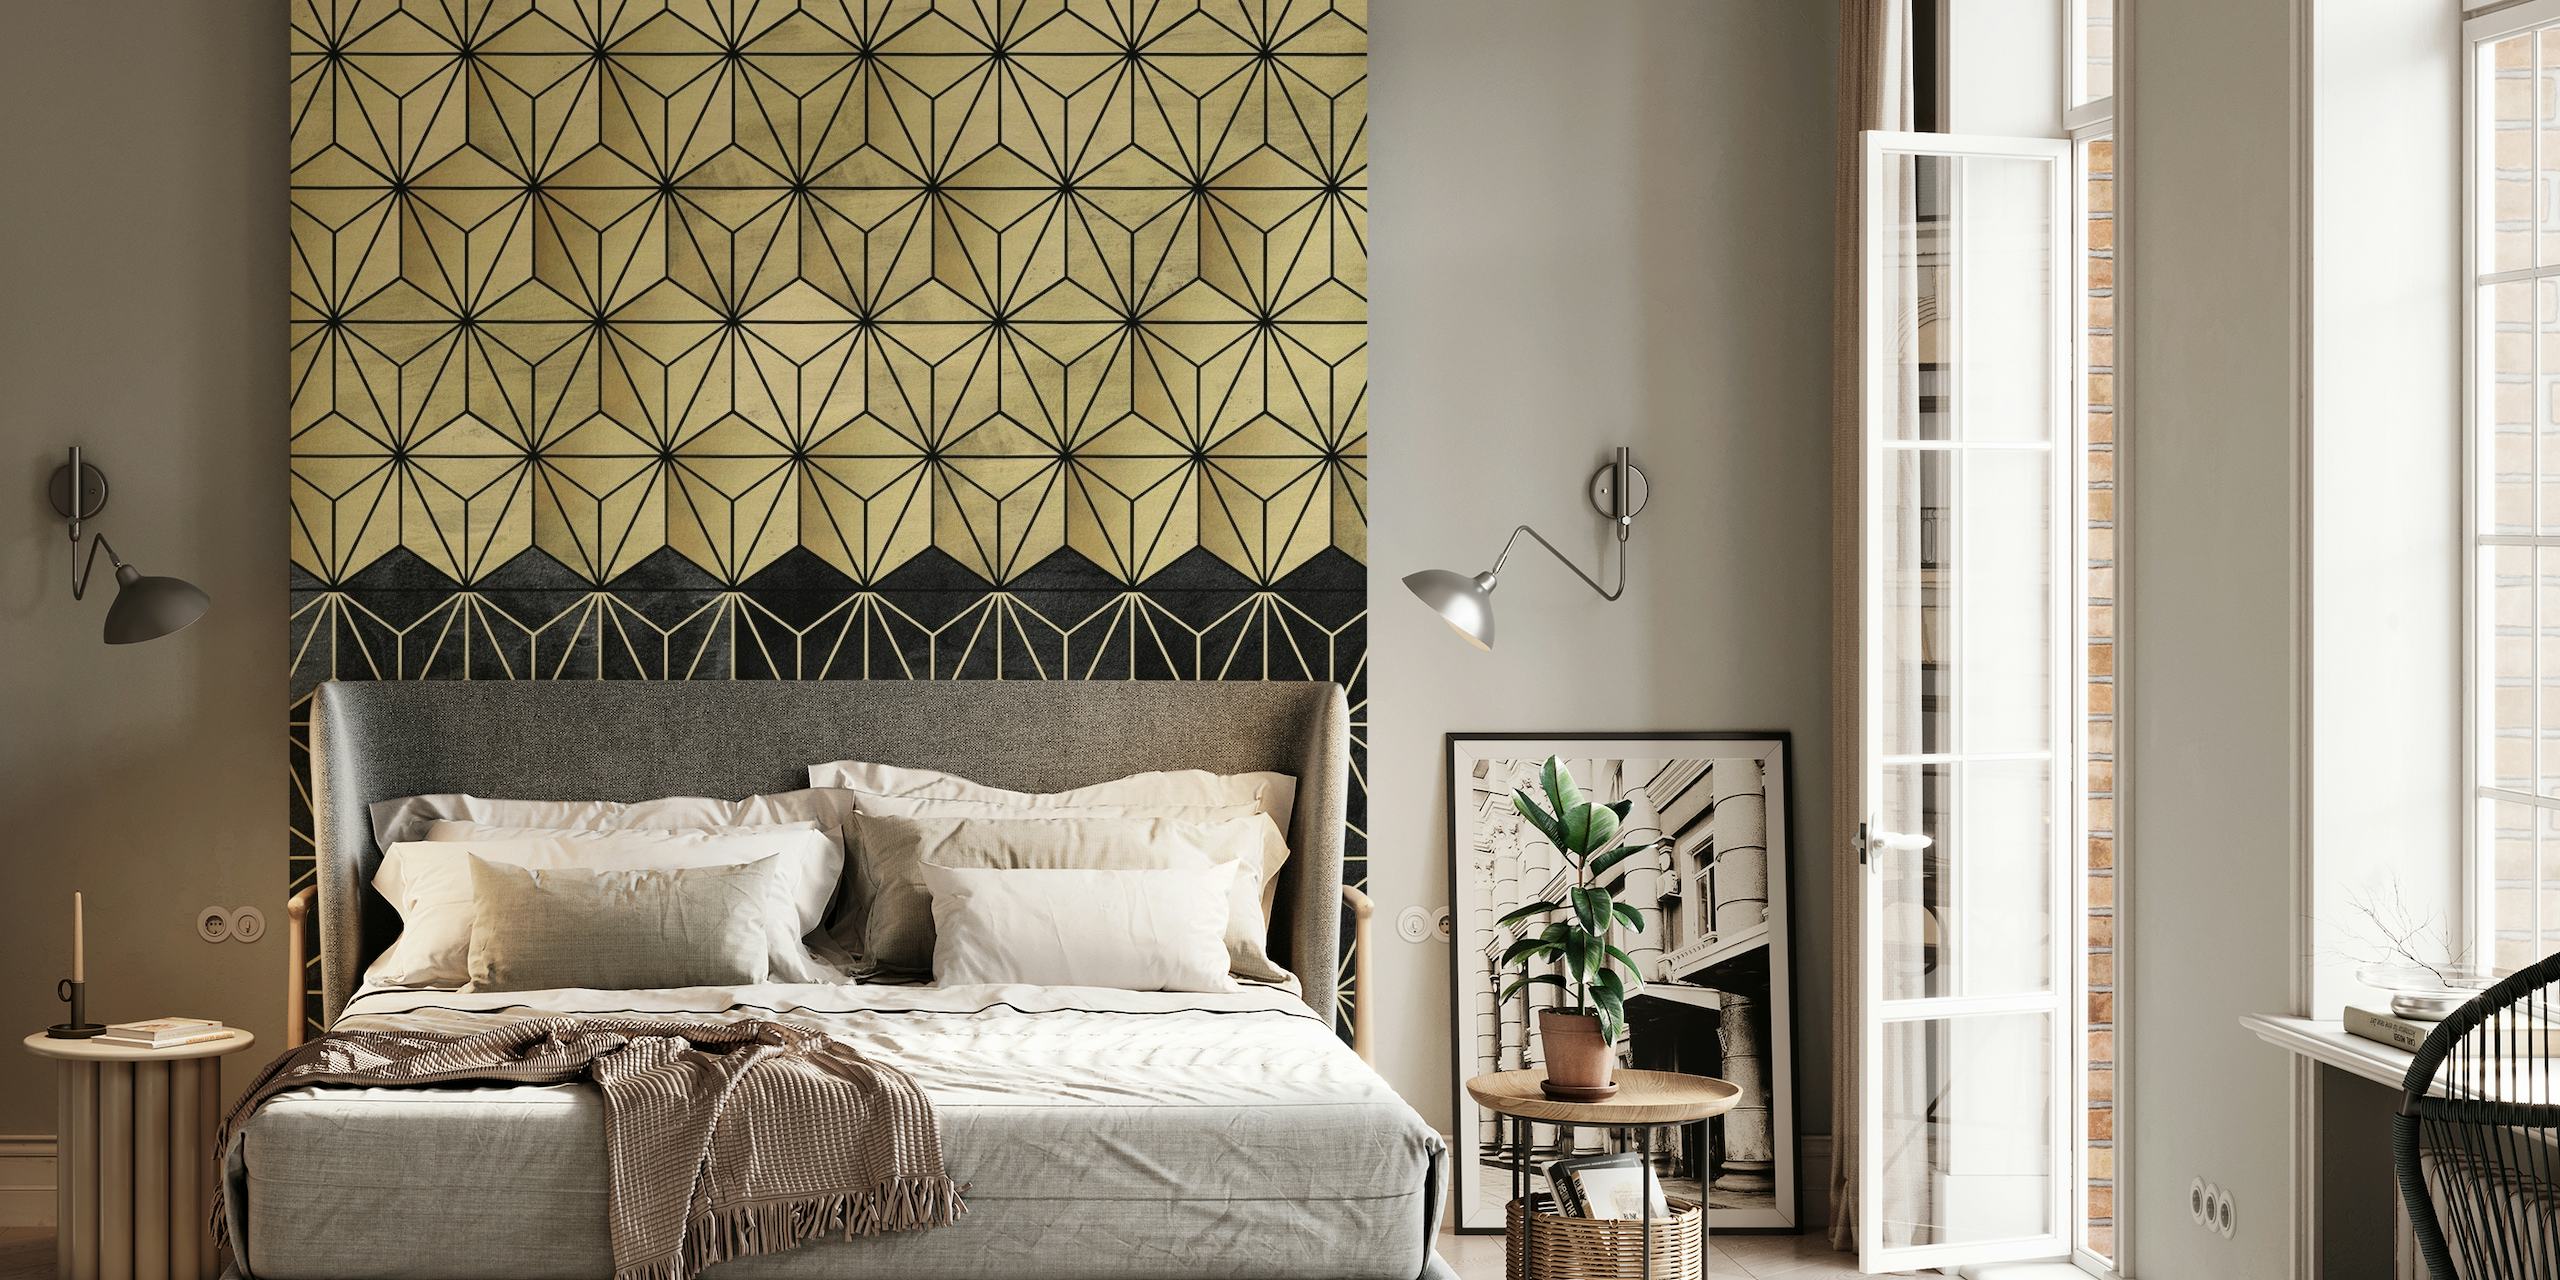 Gold and black geometric patterned wall mural from happywall.com